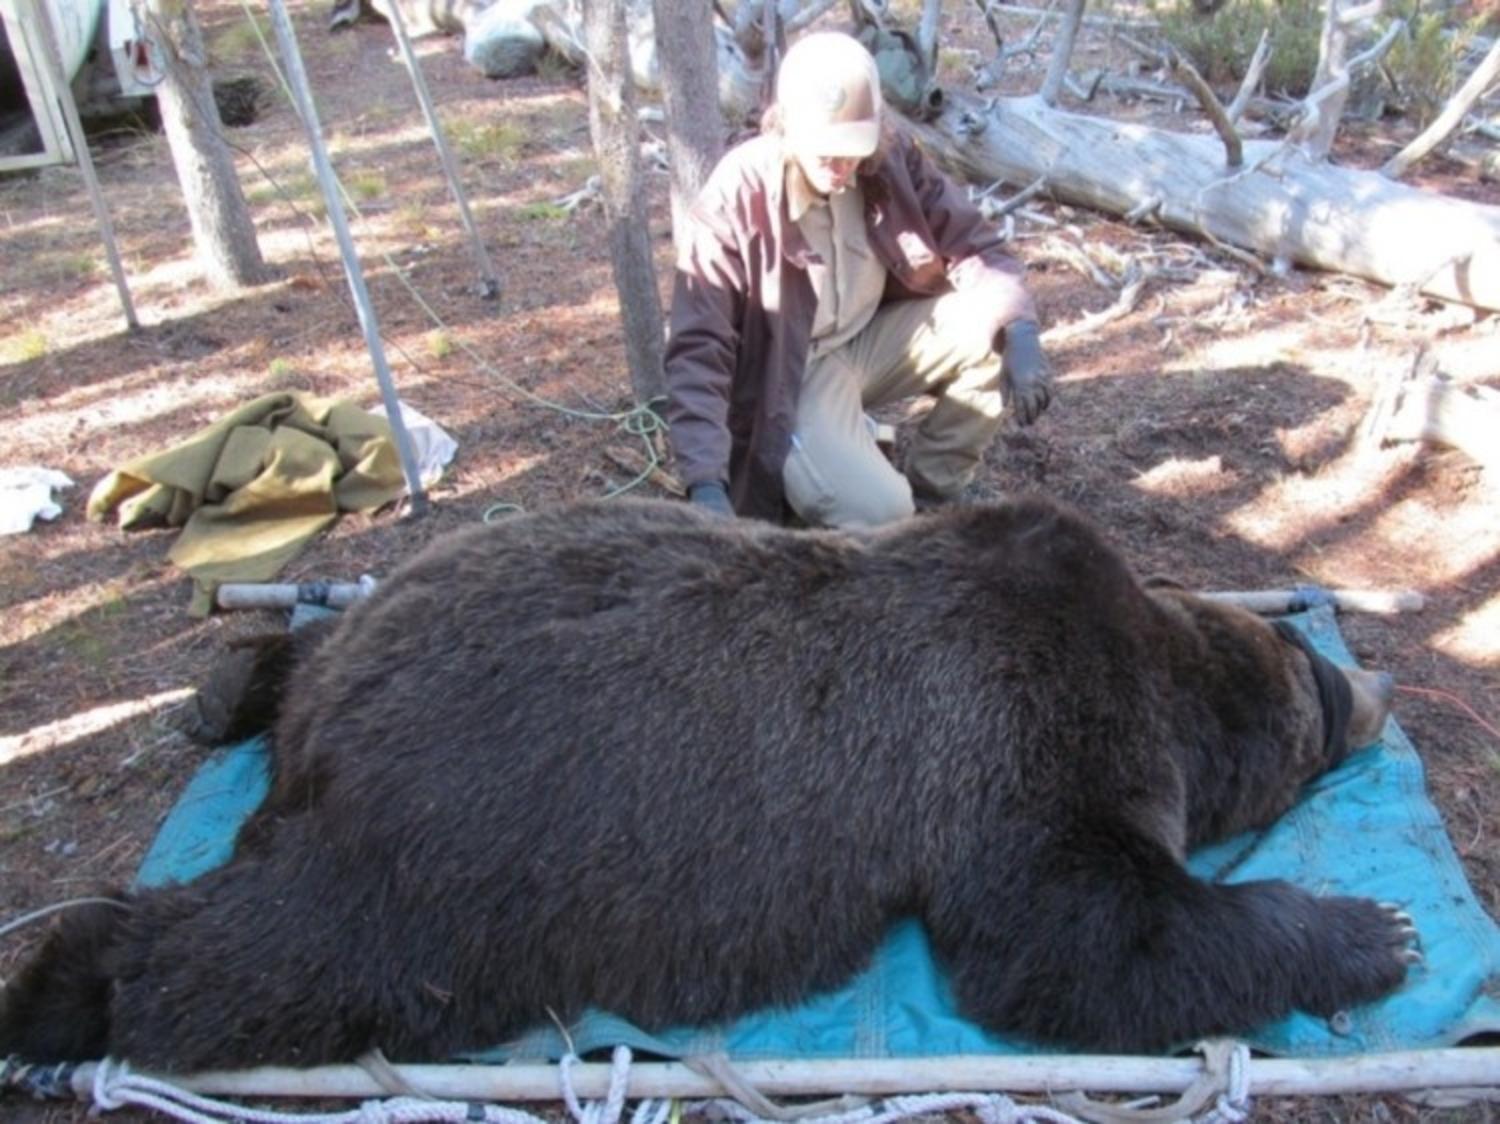 In October 2023, biologists captured and weighed Yellowstone Grizzly 566. Tipping the scales at 712 pounds, the 19-year-old bear came in more than 300 pounds heavier than it had a decade earlier. Photo by Craig Whitman/USGS